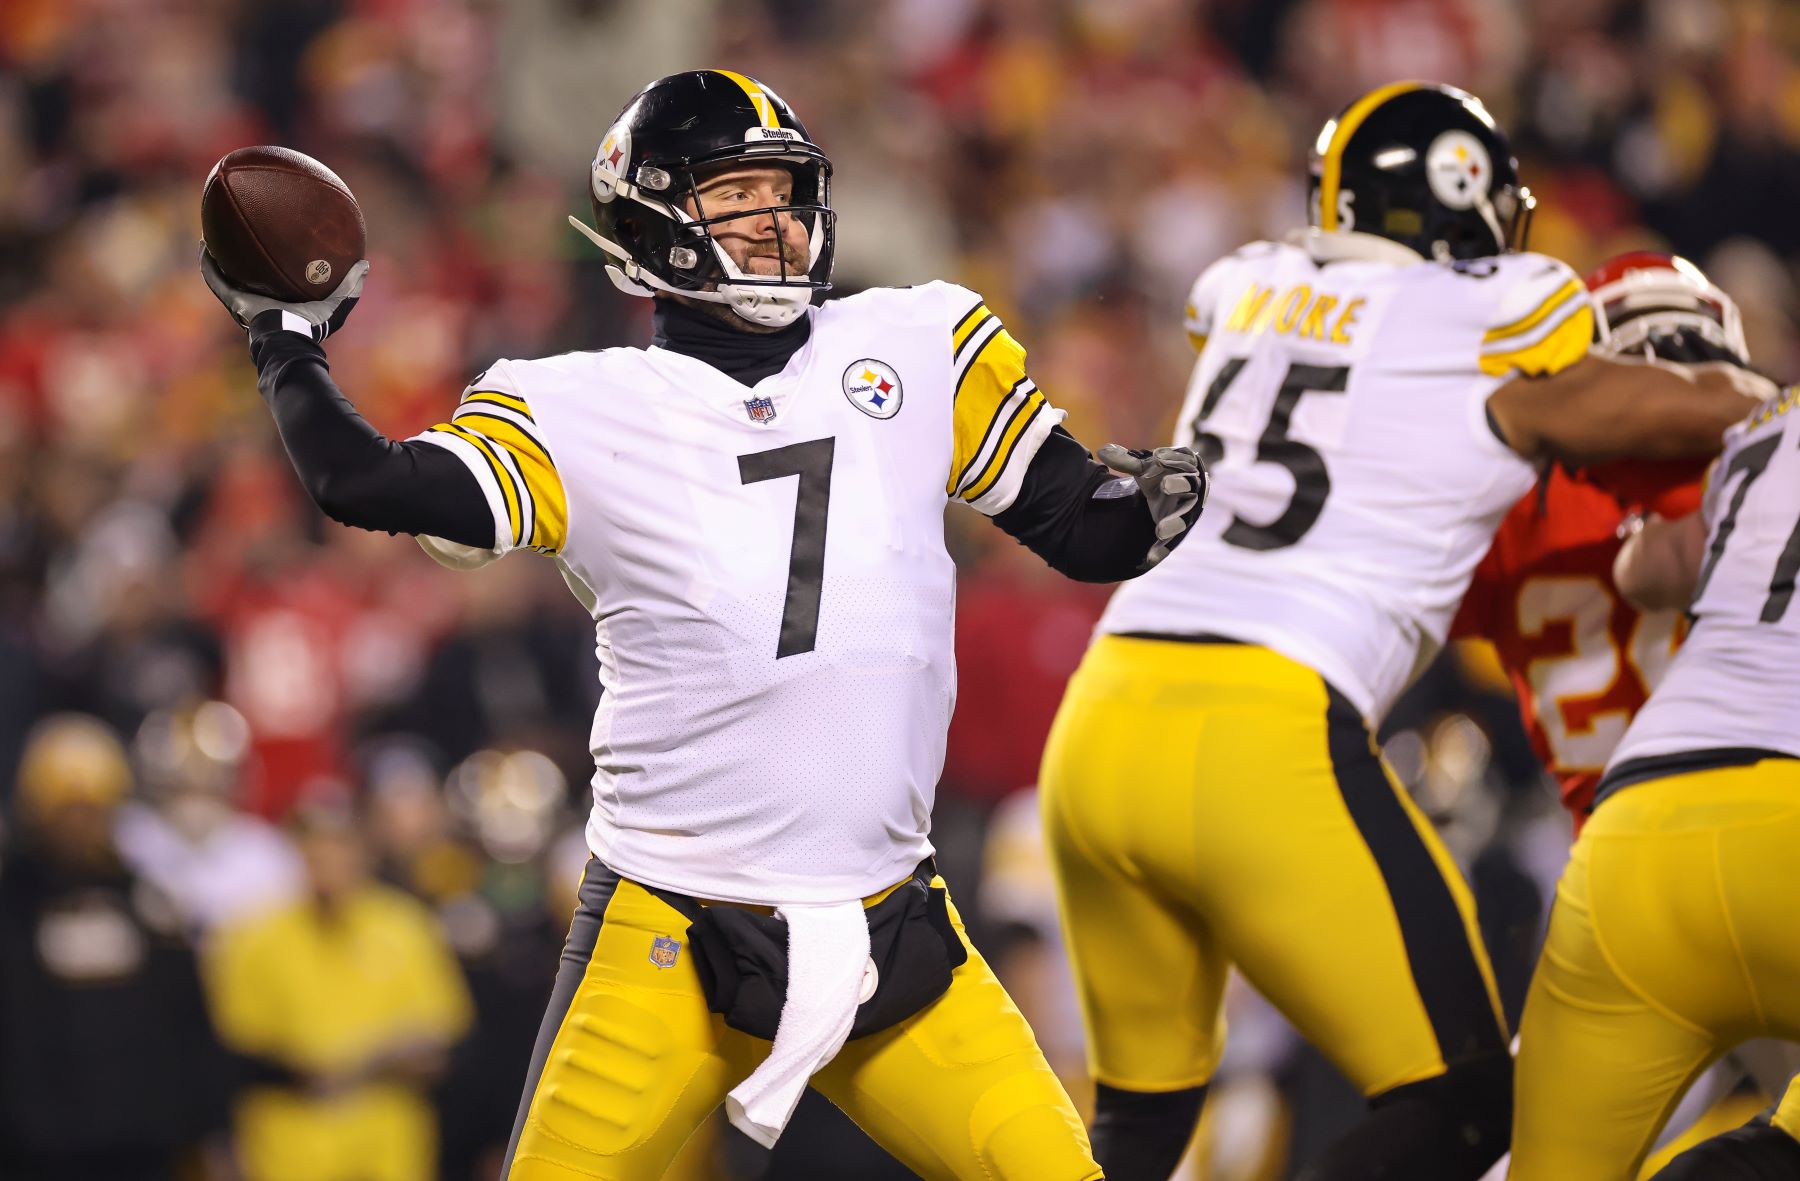 Quarterback Ben Roethlisberger as #7 on the Pittsburgh Steelers NFL team during a playoff game against the Kansas City Chiefs